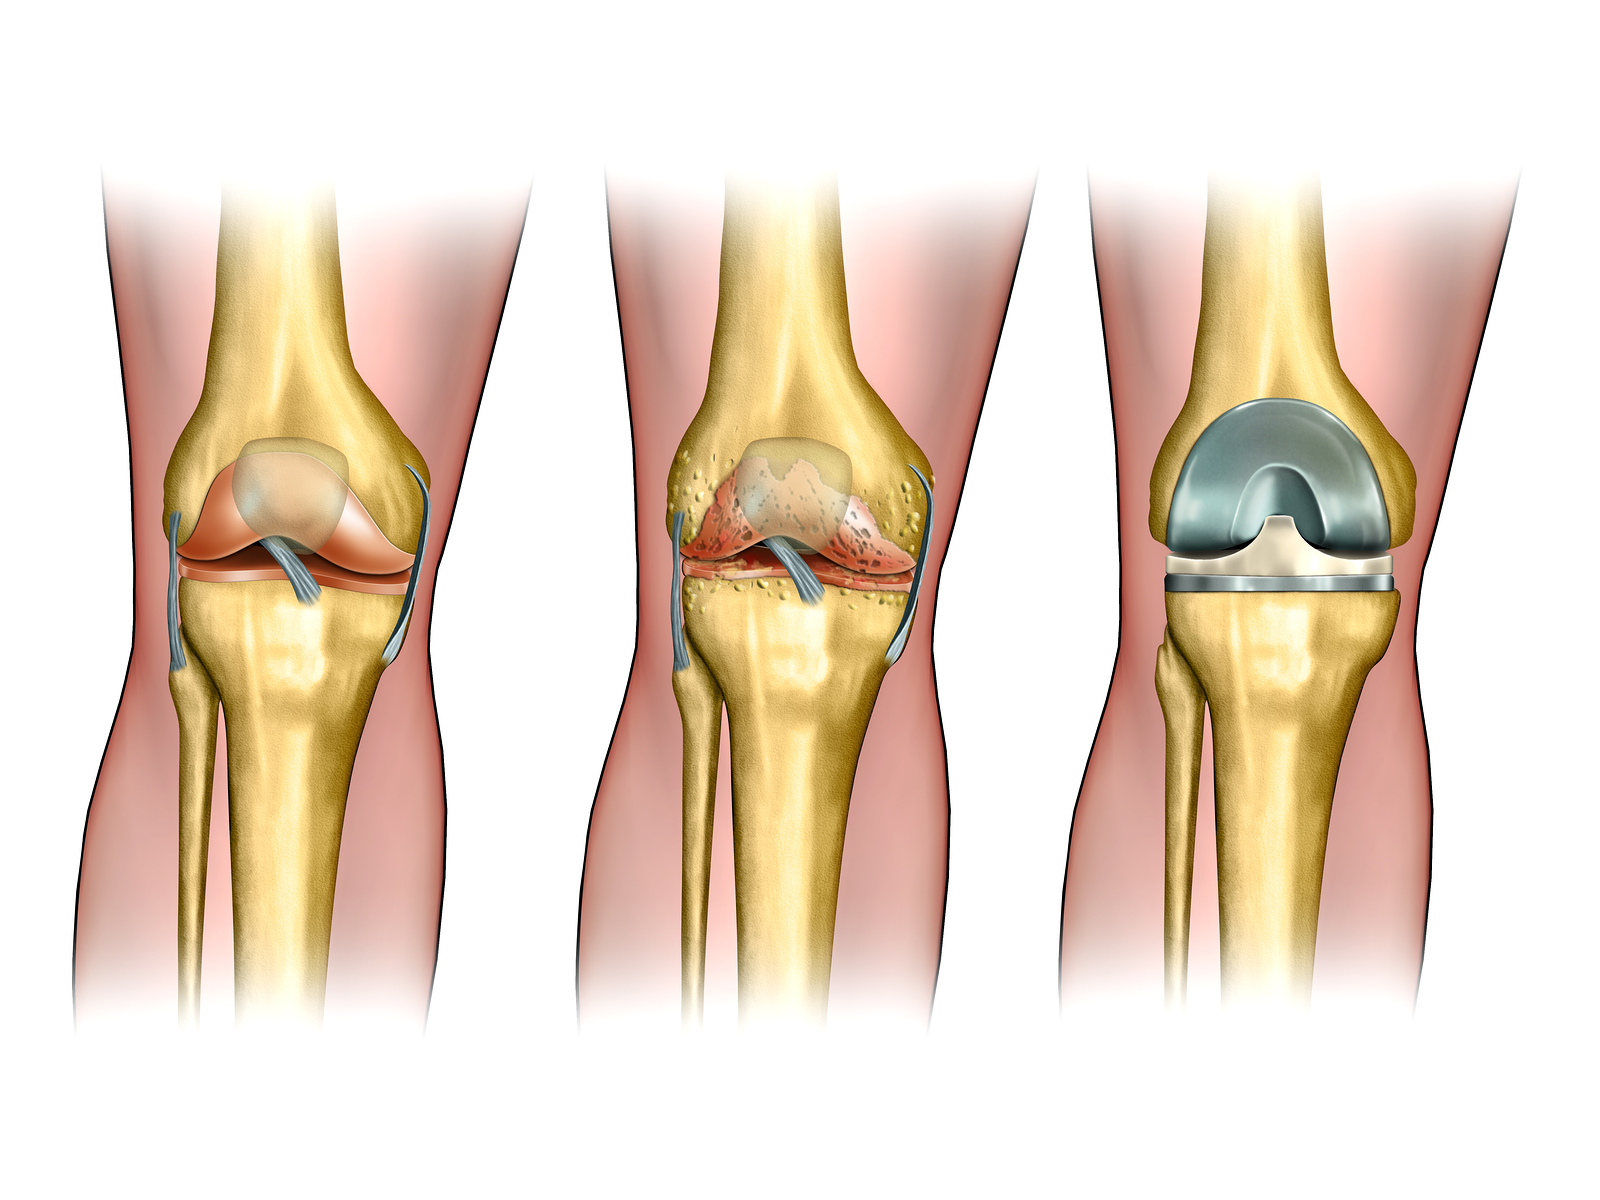 knee replacement Chhabra Hospital